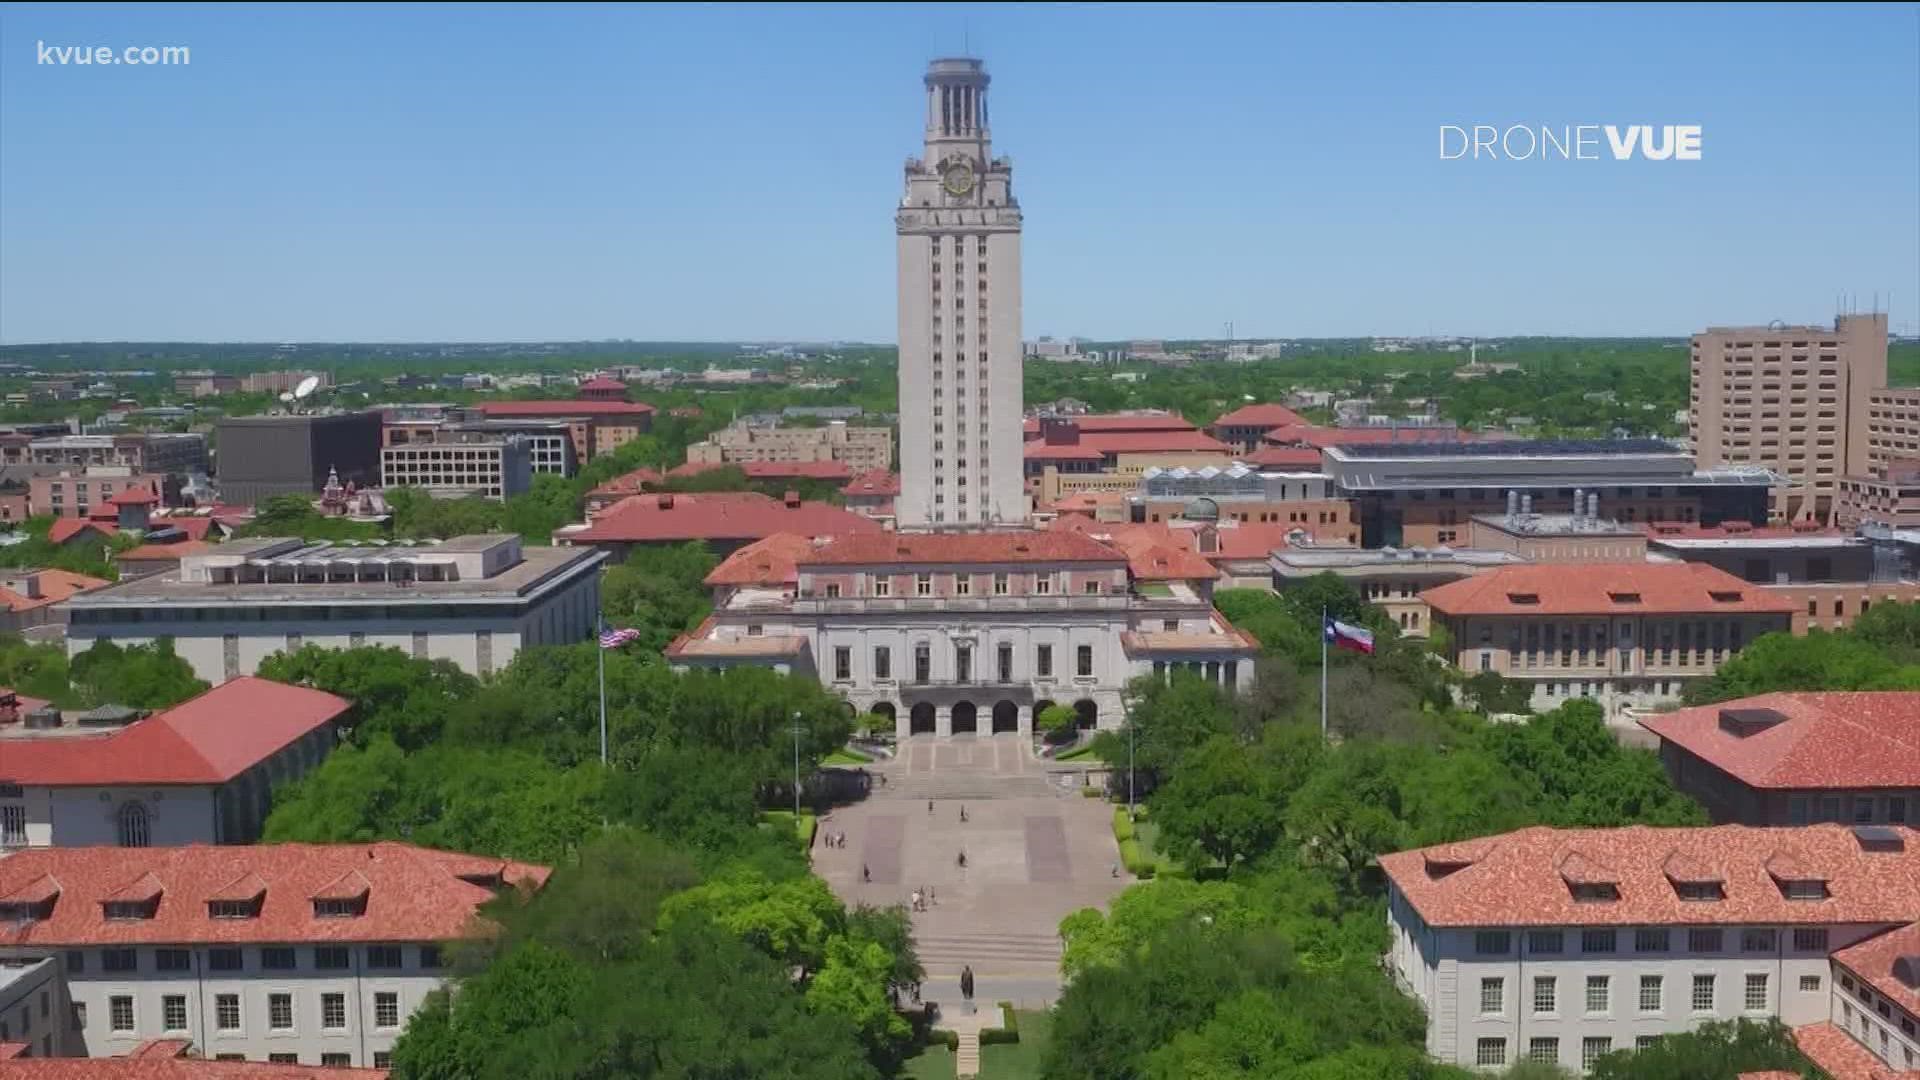 UT Austin one of best universities in the world, report says